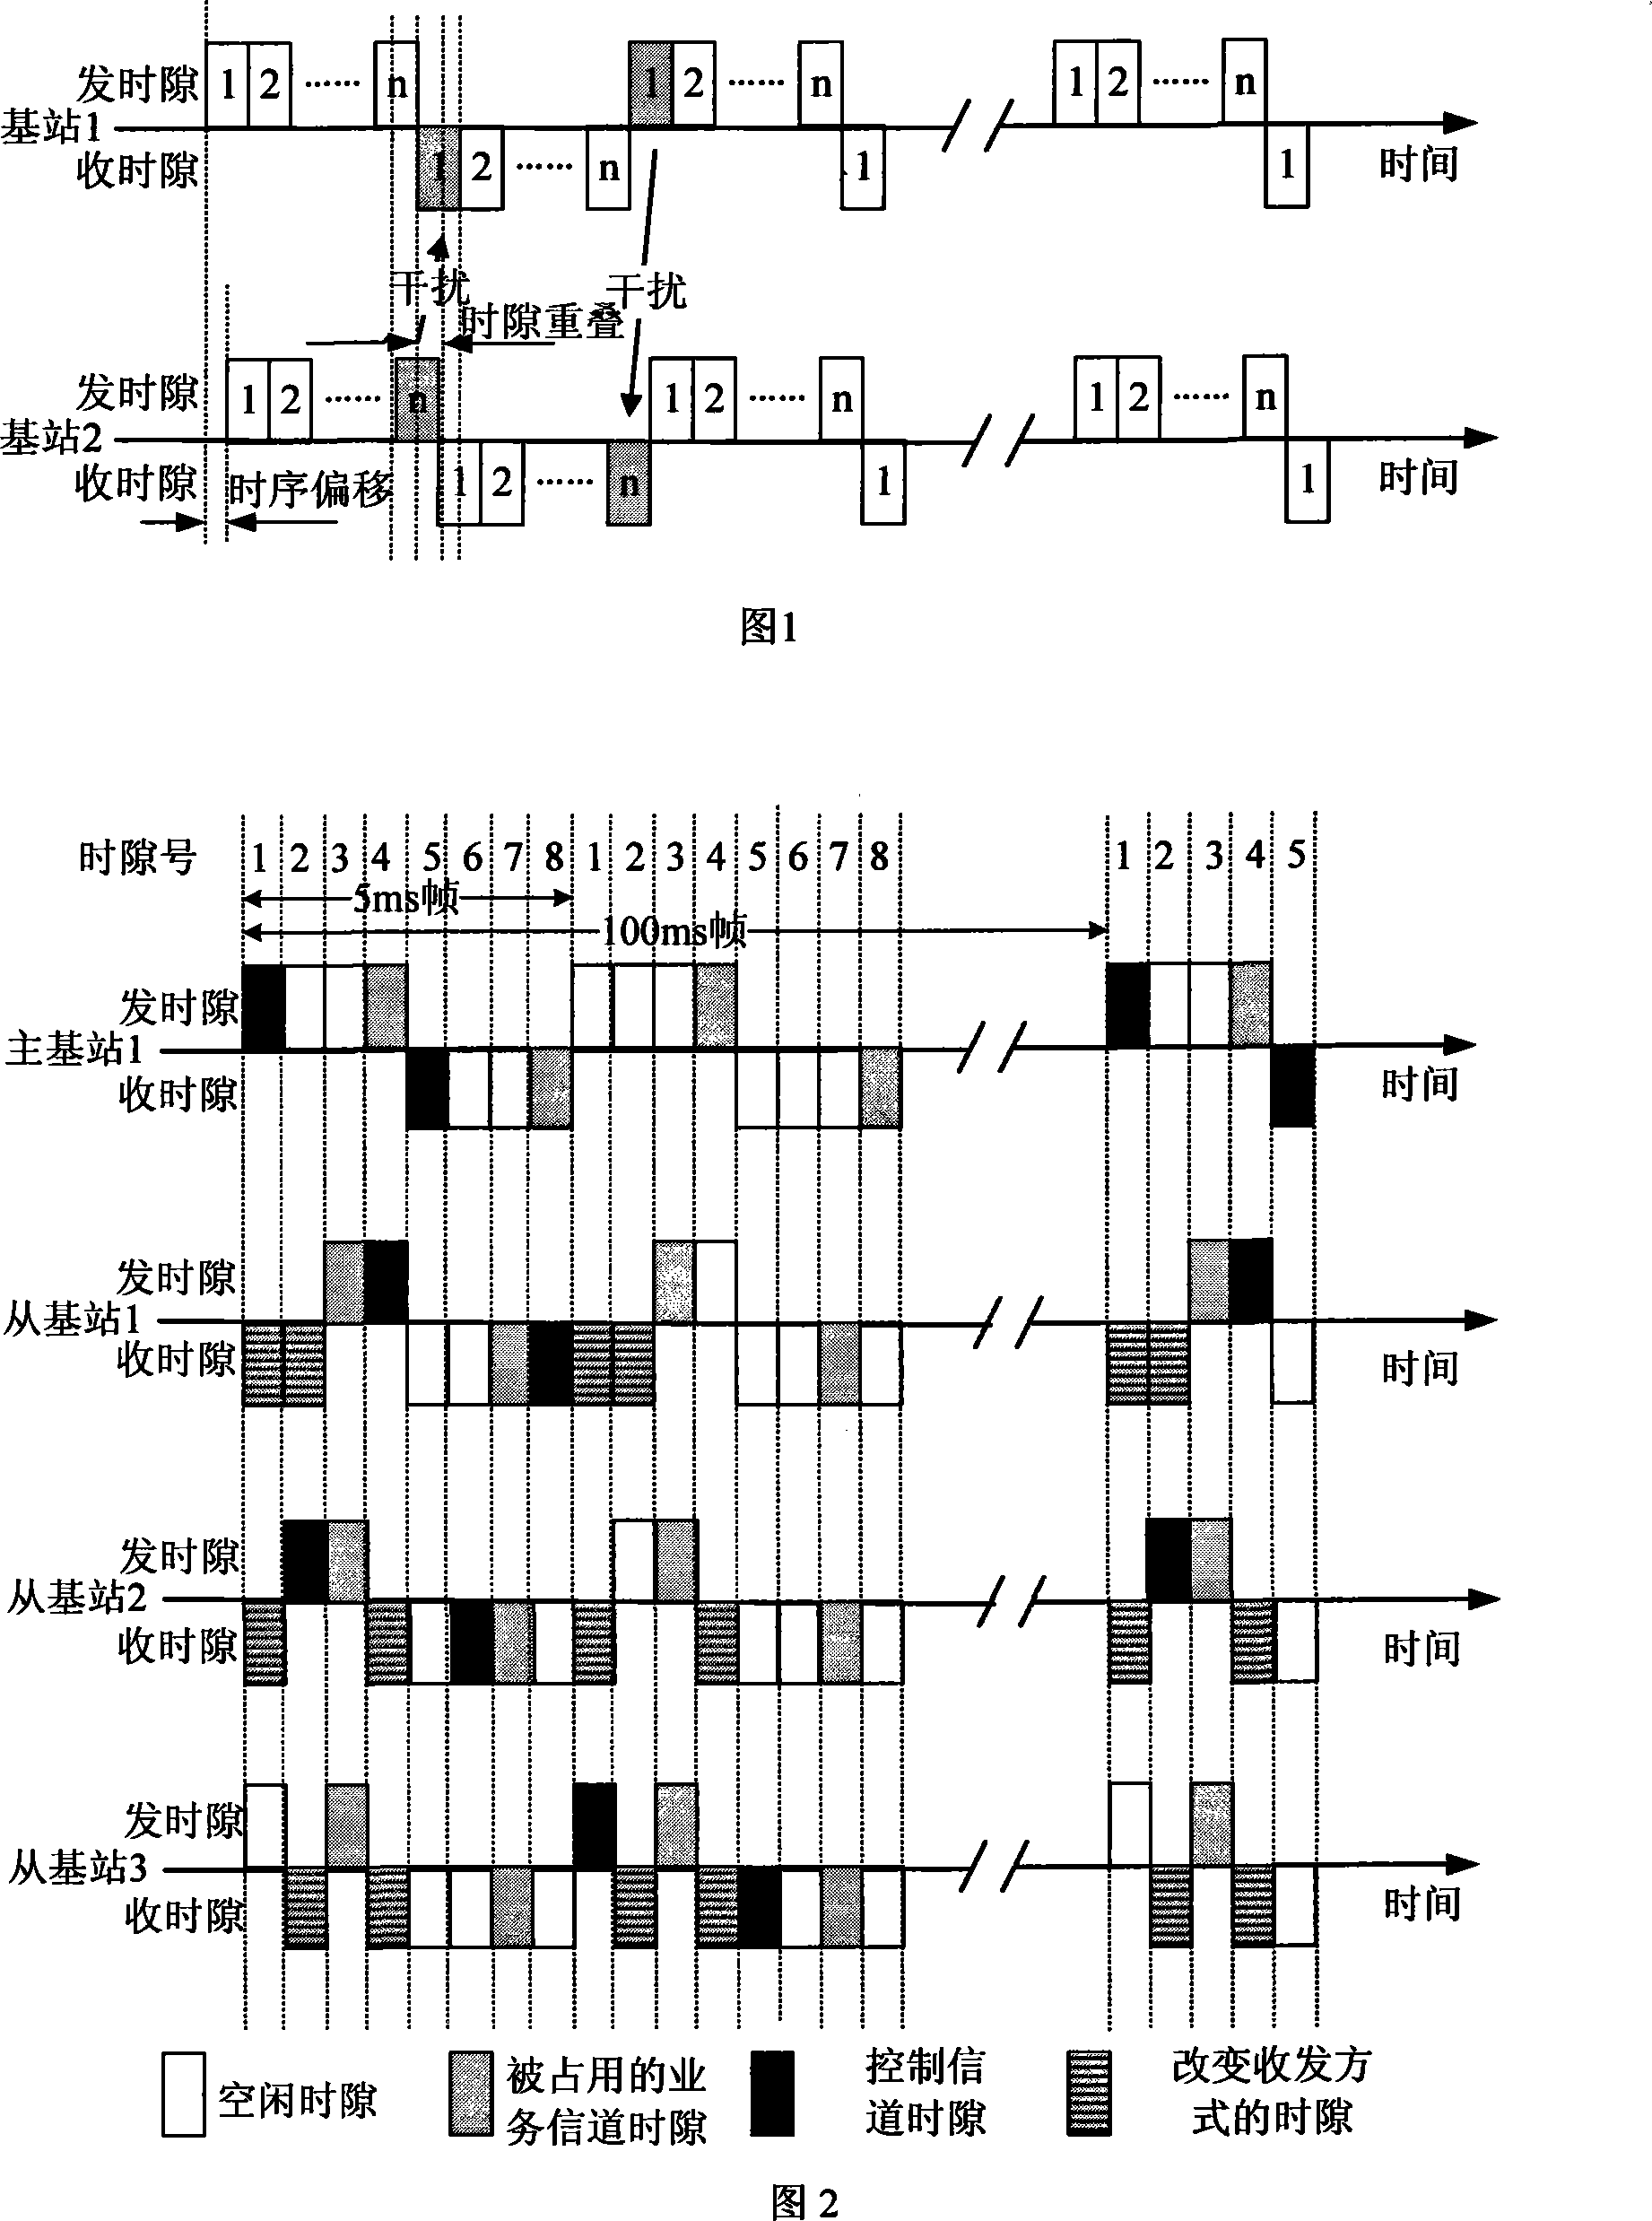 Inter-base station synchronization method in time division multiple access system